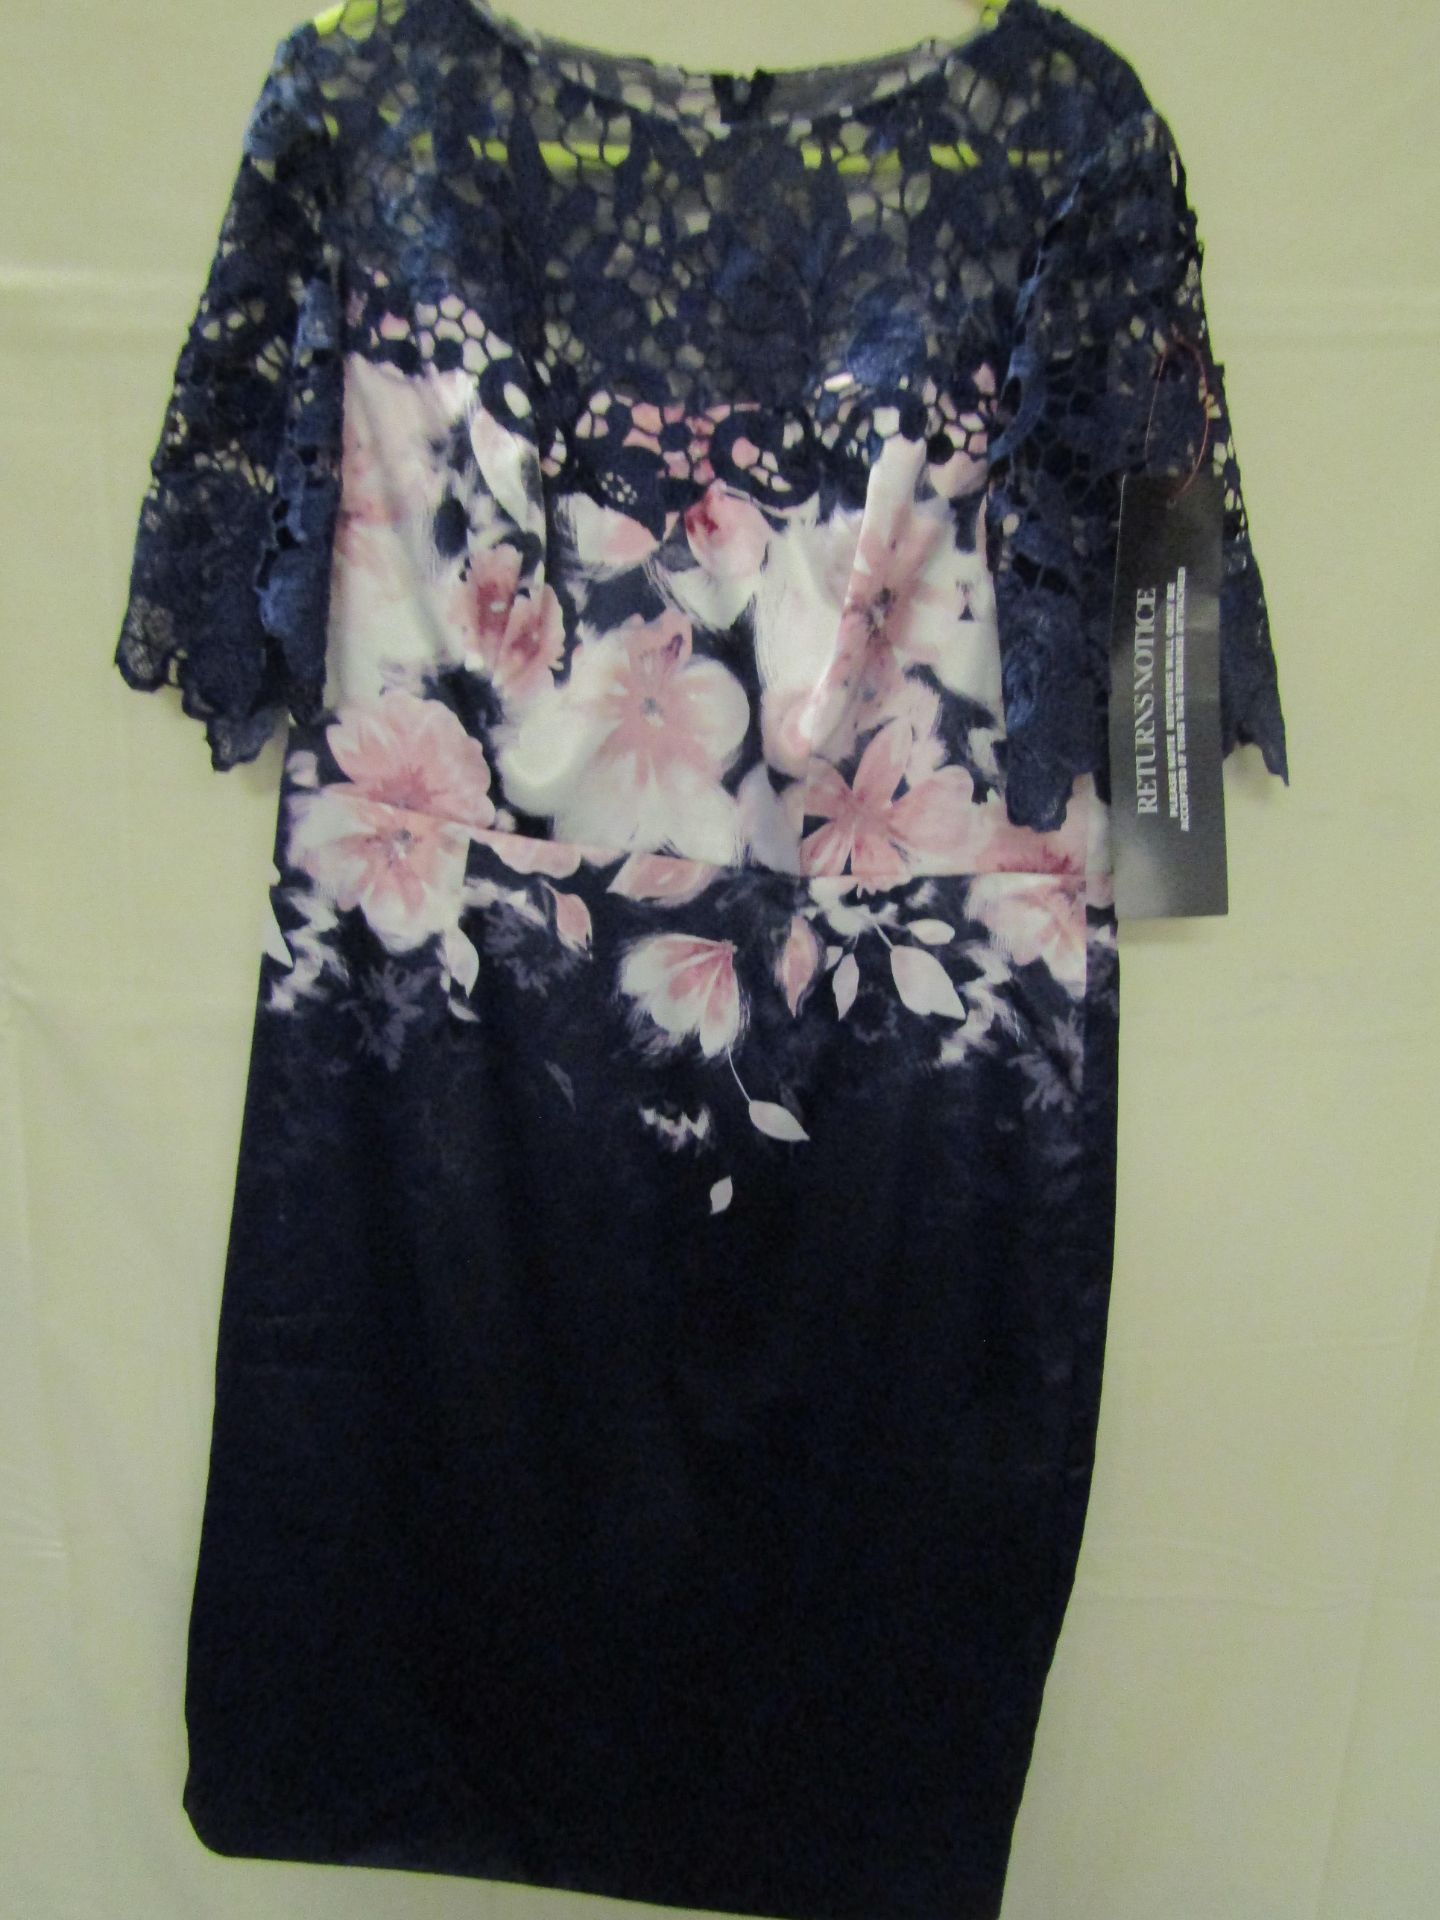 Kaleidoscope Dress Navy/Floral Size 12/14 Has Tags Attatched